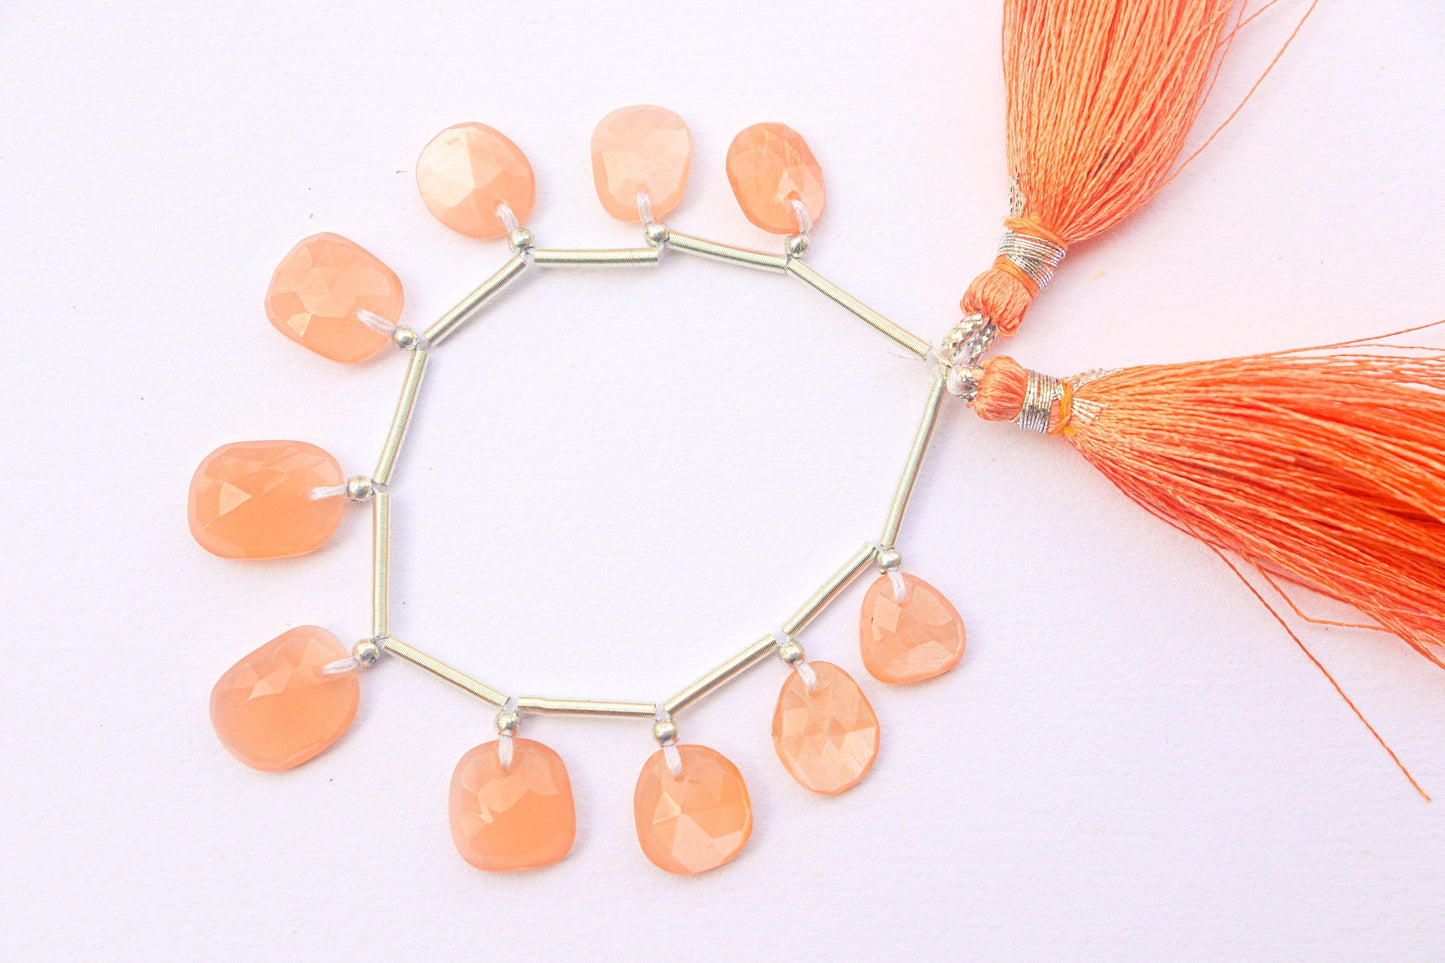 Peach Moonstone Faceted Uneven Shape Rose cut Briolette Beads, Natural Moonstone Gemstone Beads, 7x8mm to 12x13mm, 13 Pieces String Beadsforyourjewelry